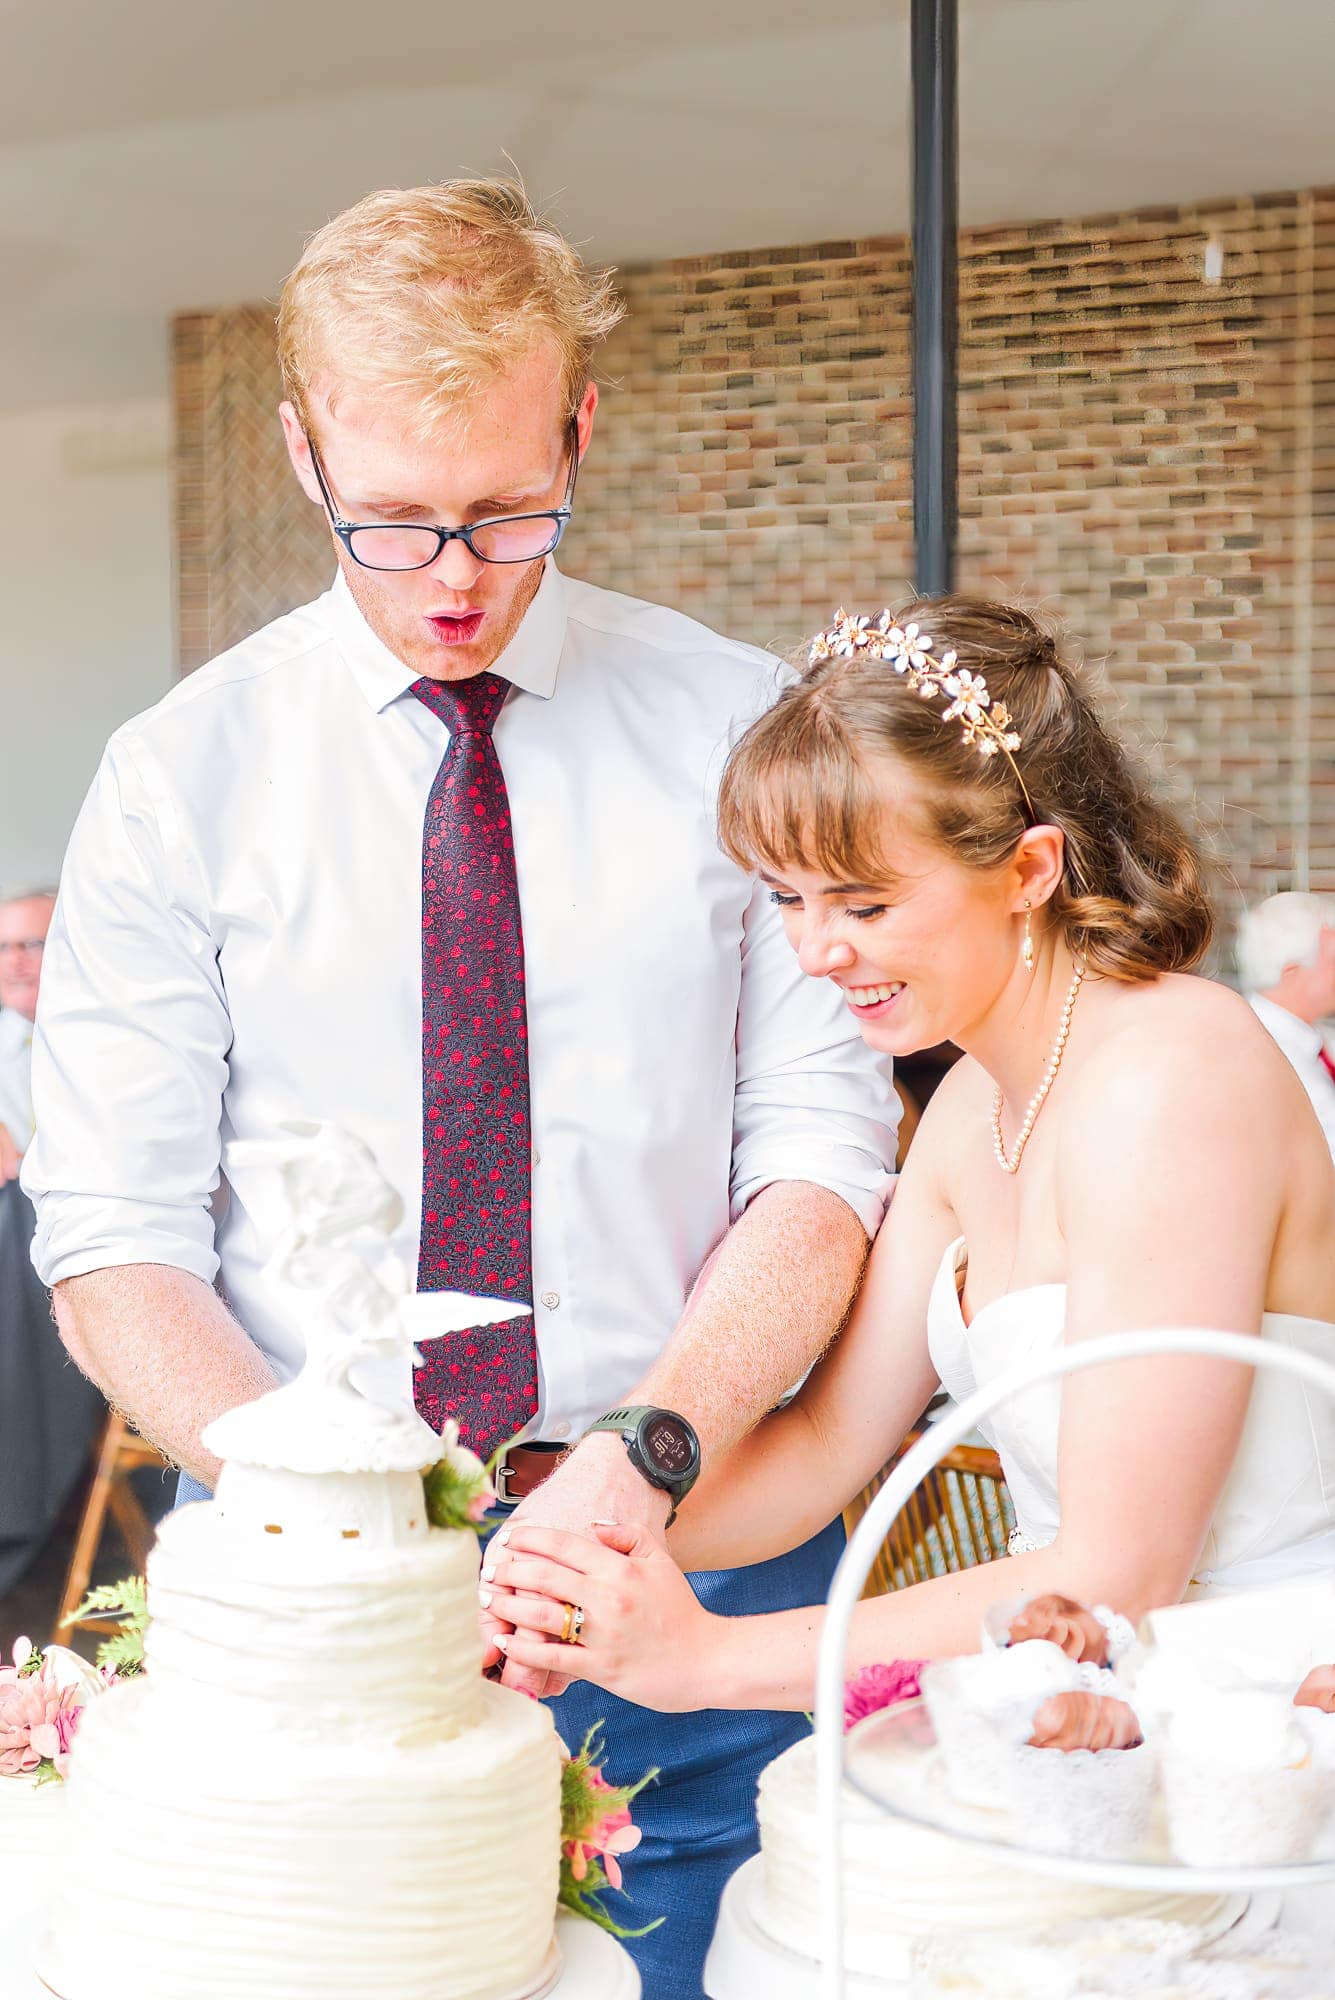 Cutting the cake is a classic tradition for any wedding at Delaney Ridge.